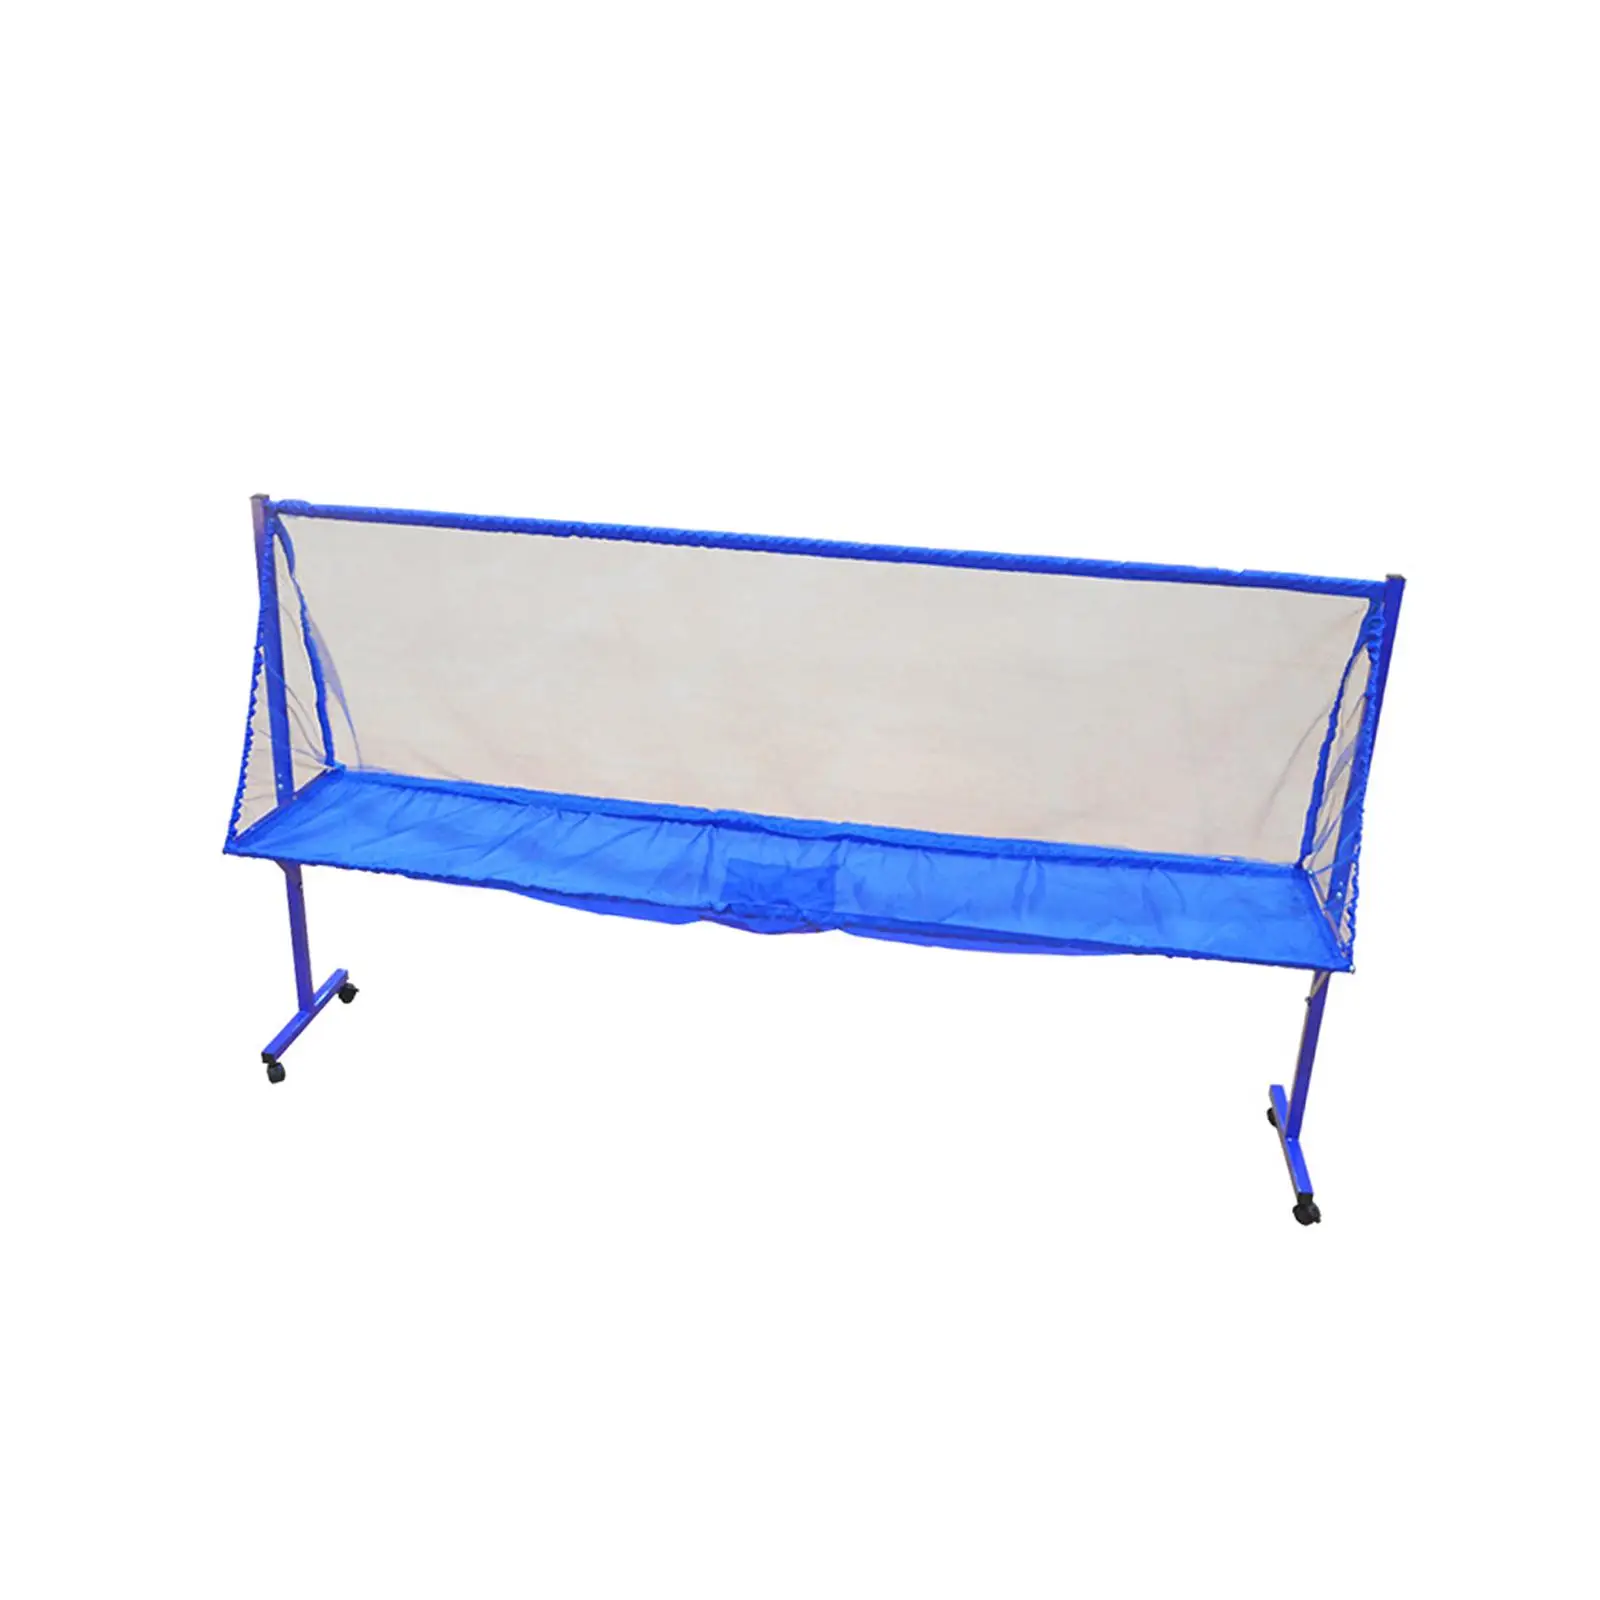 

Movable Table Tennis Ball Catch Net Large Ball Collector Ping Pong Recycle Catcher for Multi Ball Drills Self Ping Pong Train